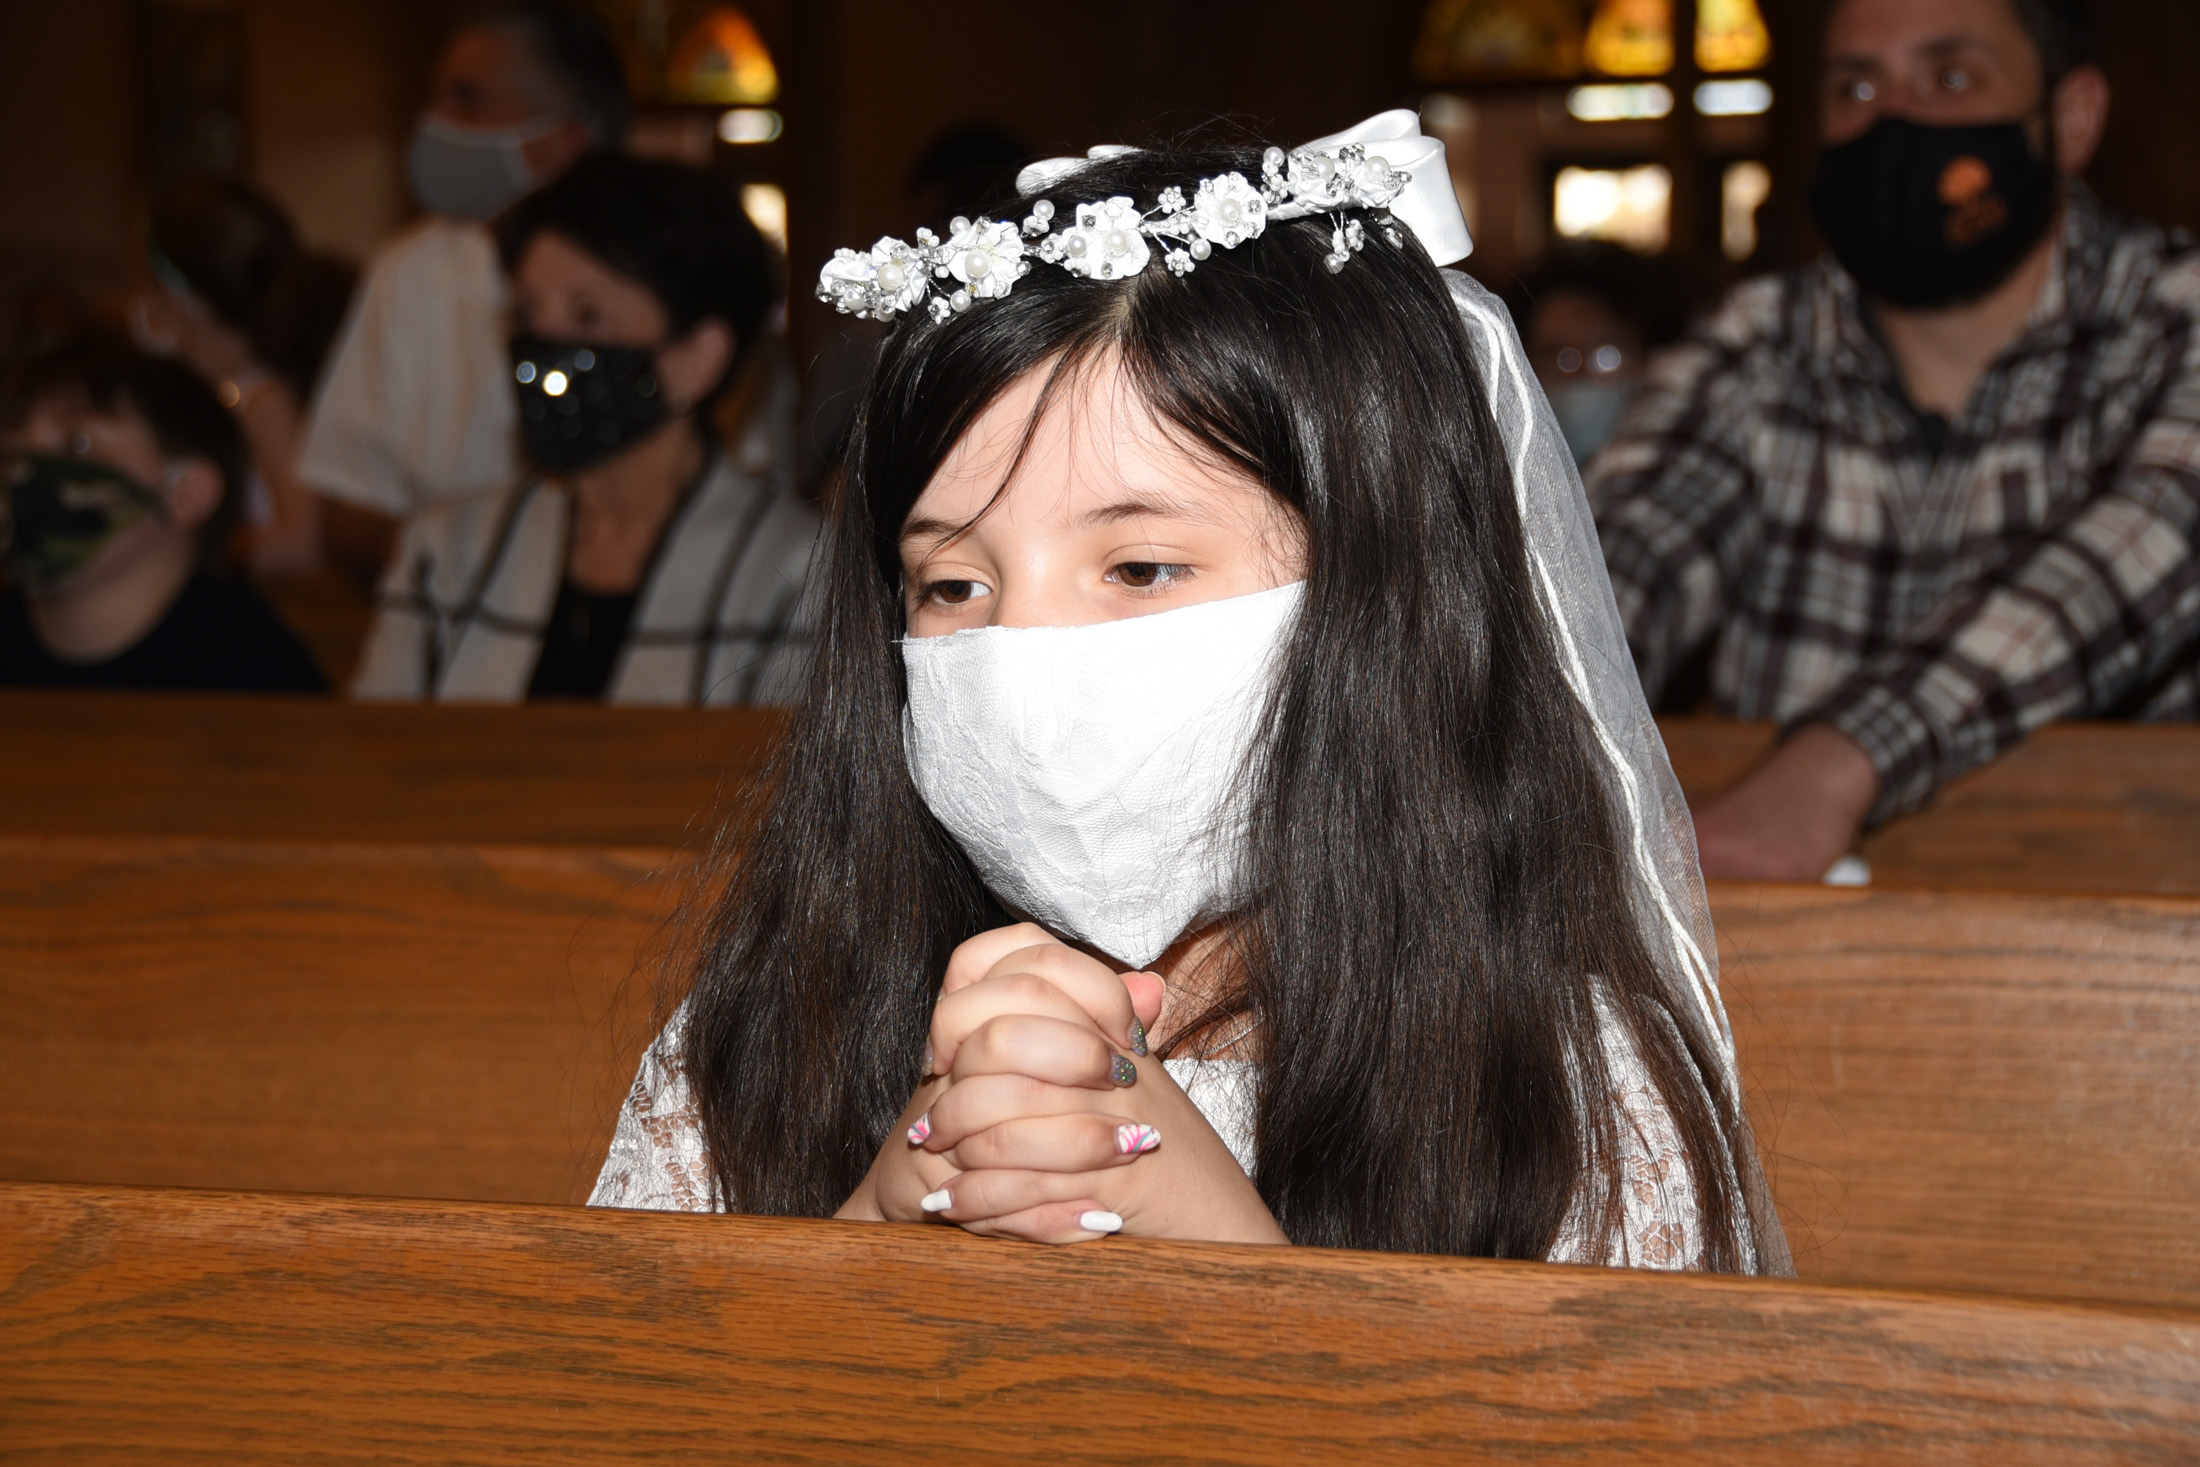 FIRST-COMMUNION-MAY-2-2021-1001001085